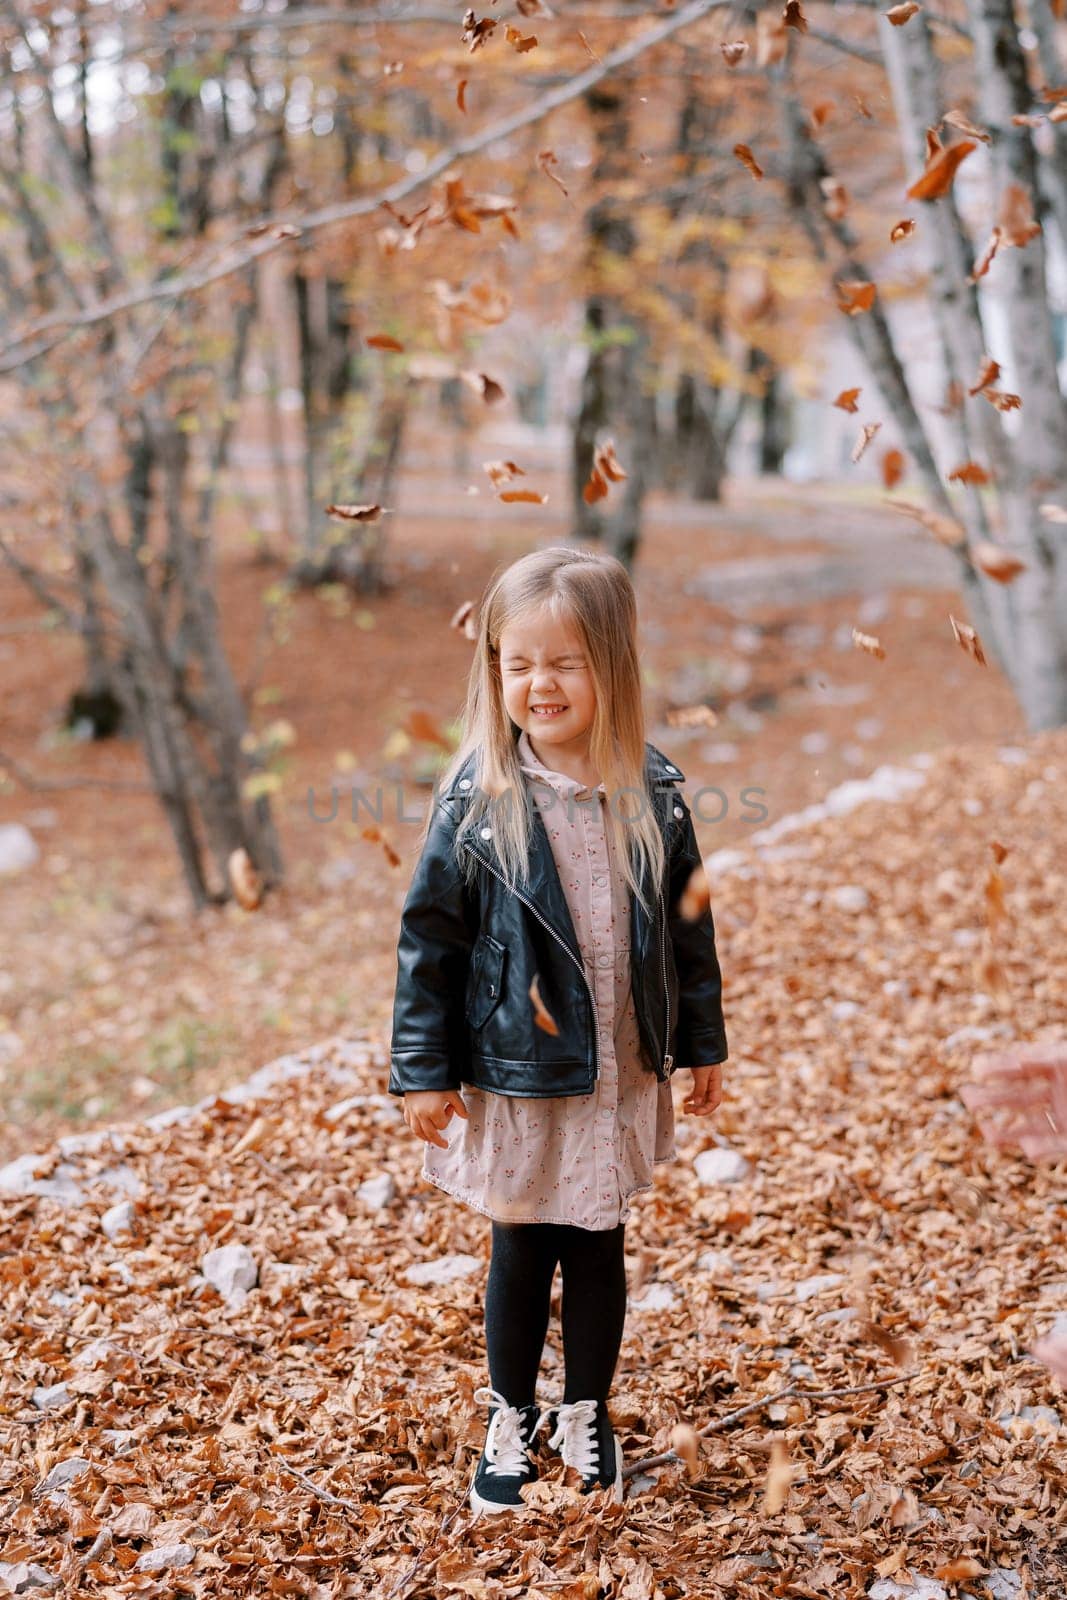 Little girl stands with her eyes closed under falling dry leaves in the autumn forest. High quality photo